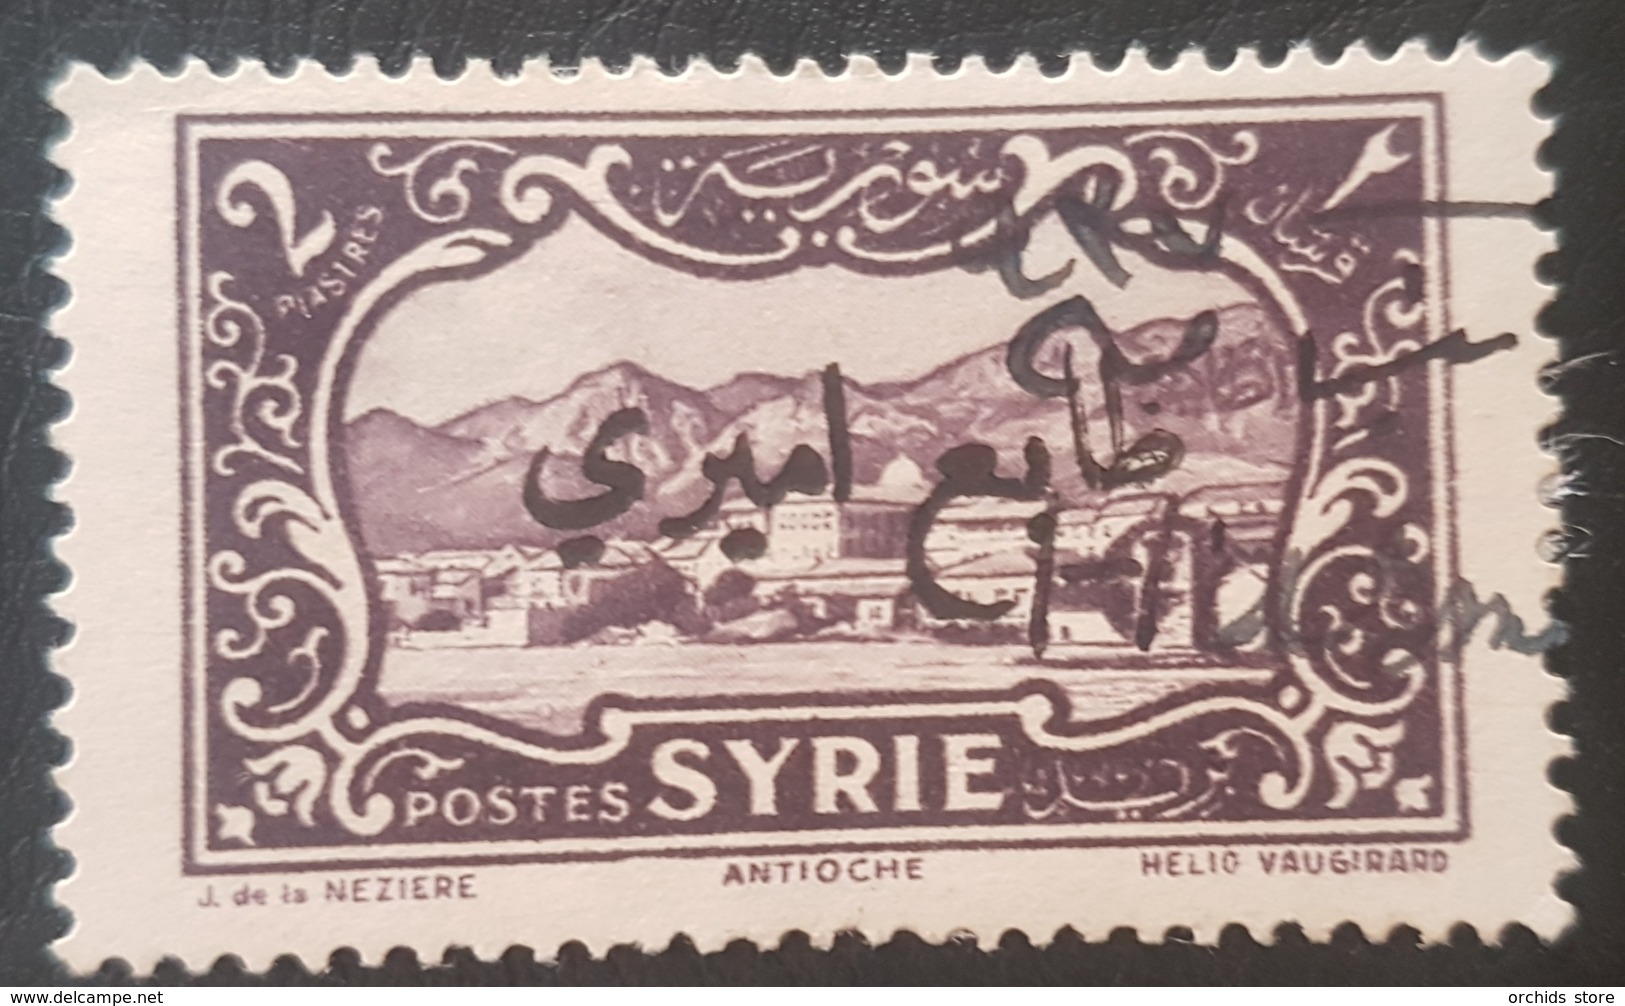 AS4 #160 - Syria 1939 Postage Stamp 2 Pi Of 1930 Overprinted Fiscal Revenue - Siria